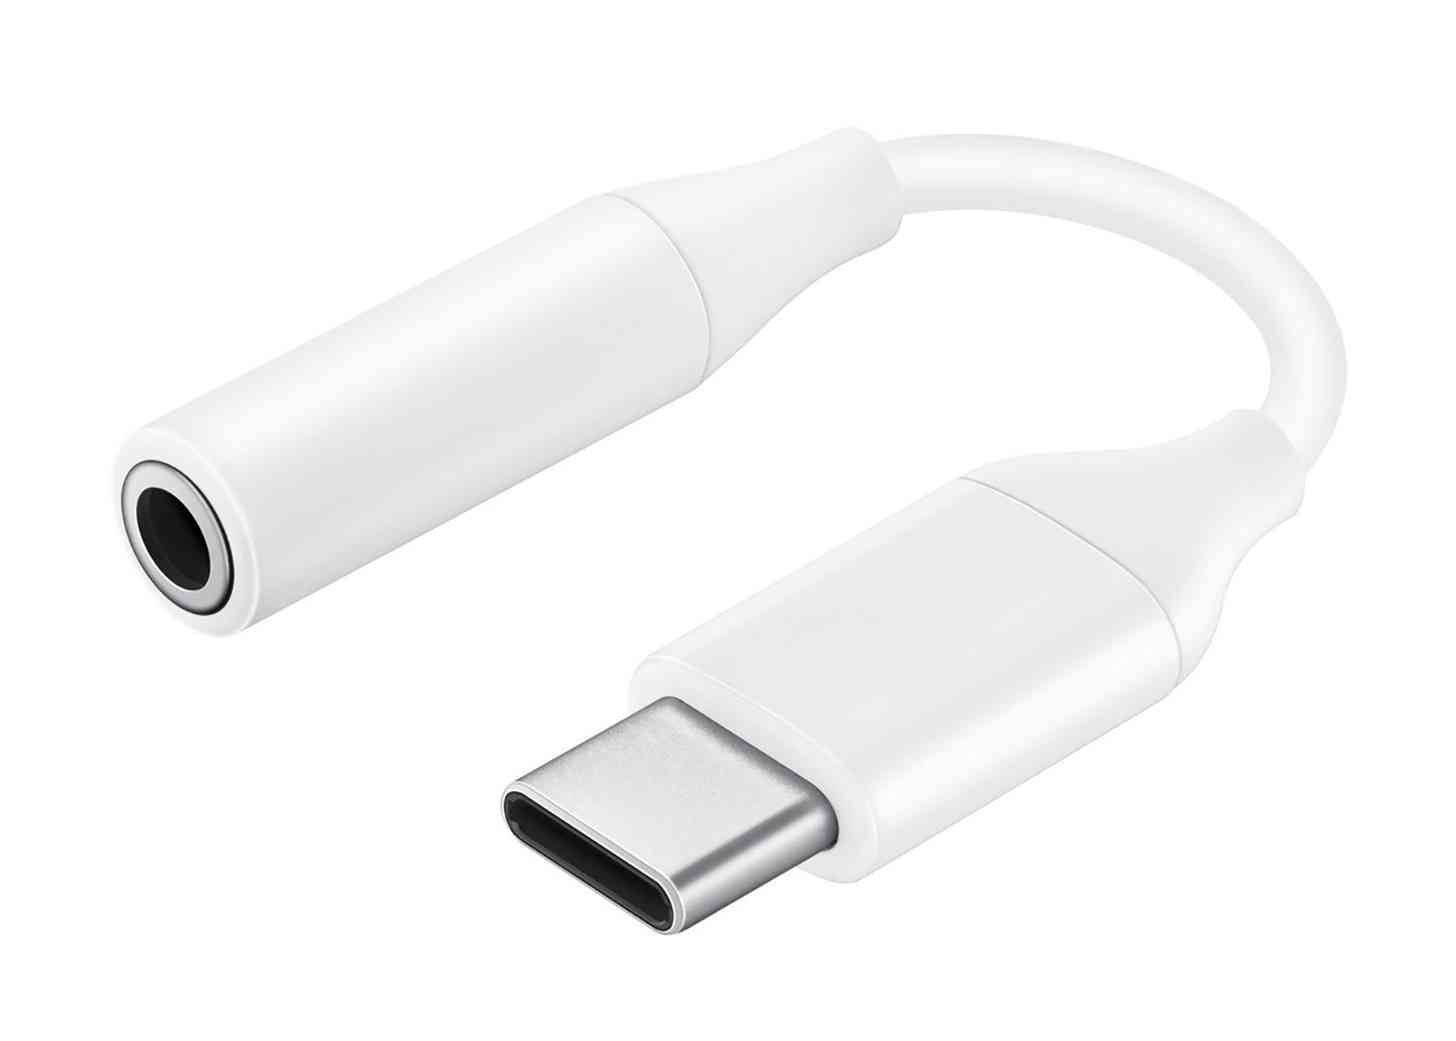 Galaxy Note 10 3.5mm to USB-C dongle